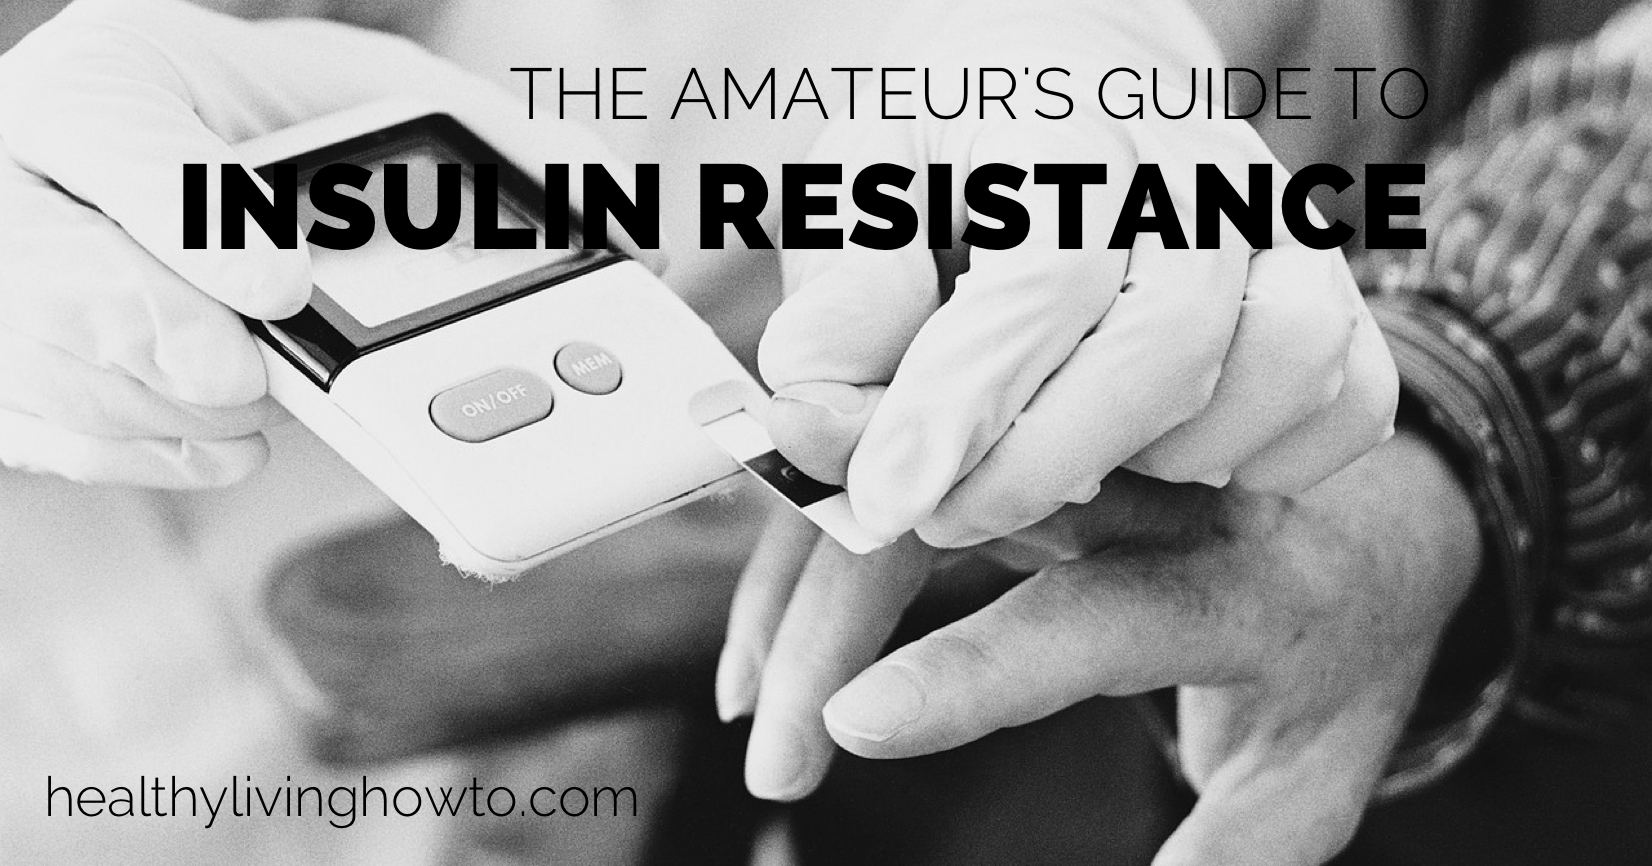 Guide to Insulin Resistance